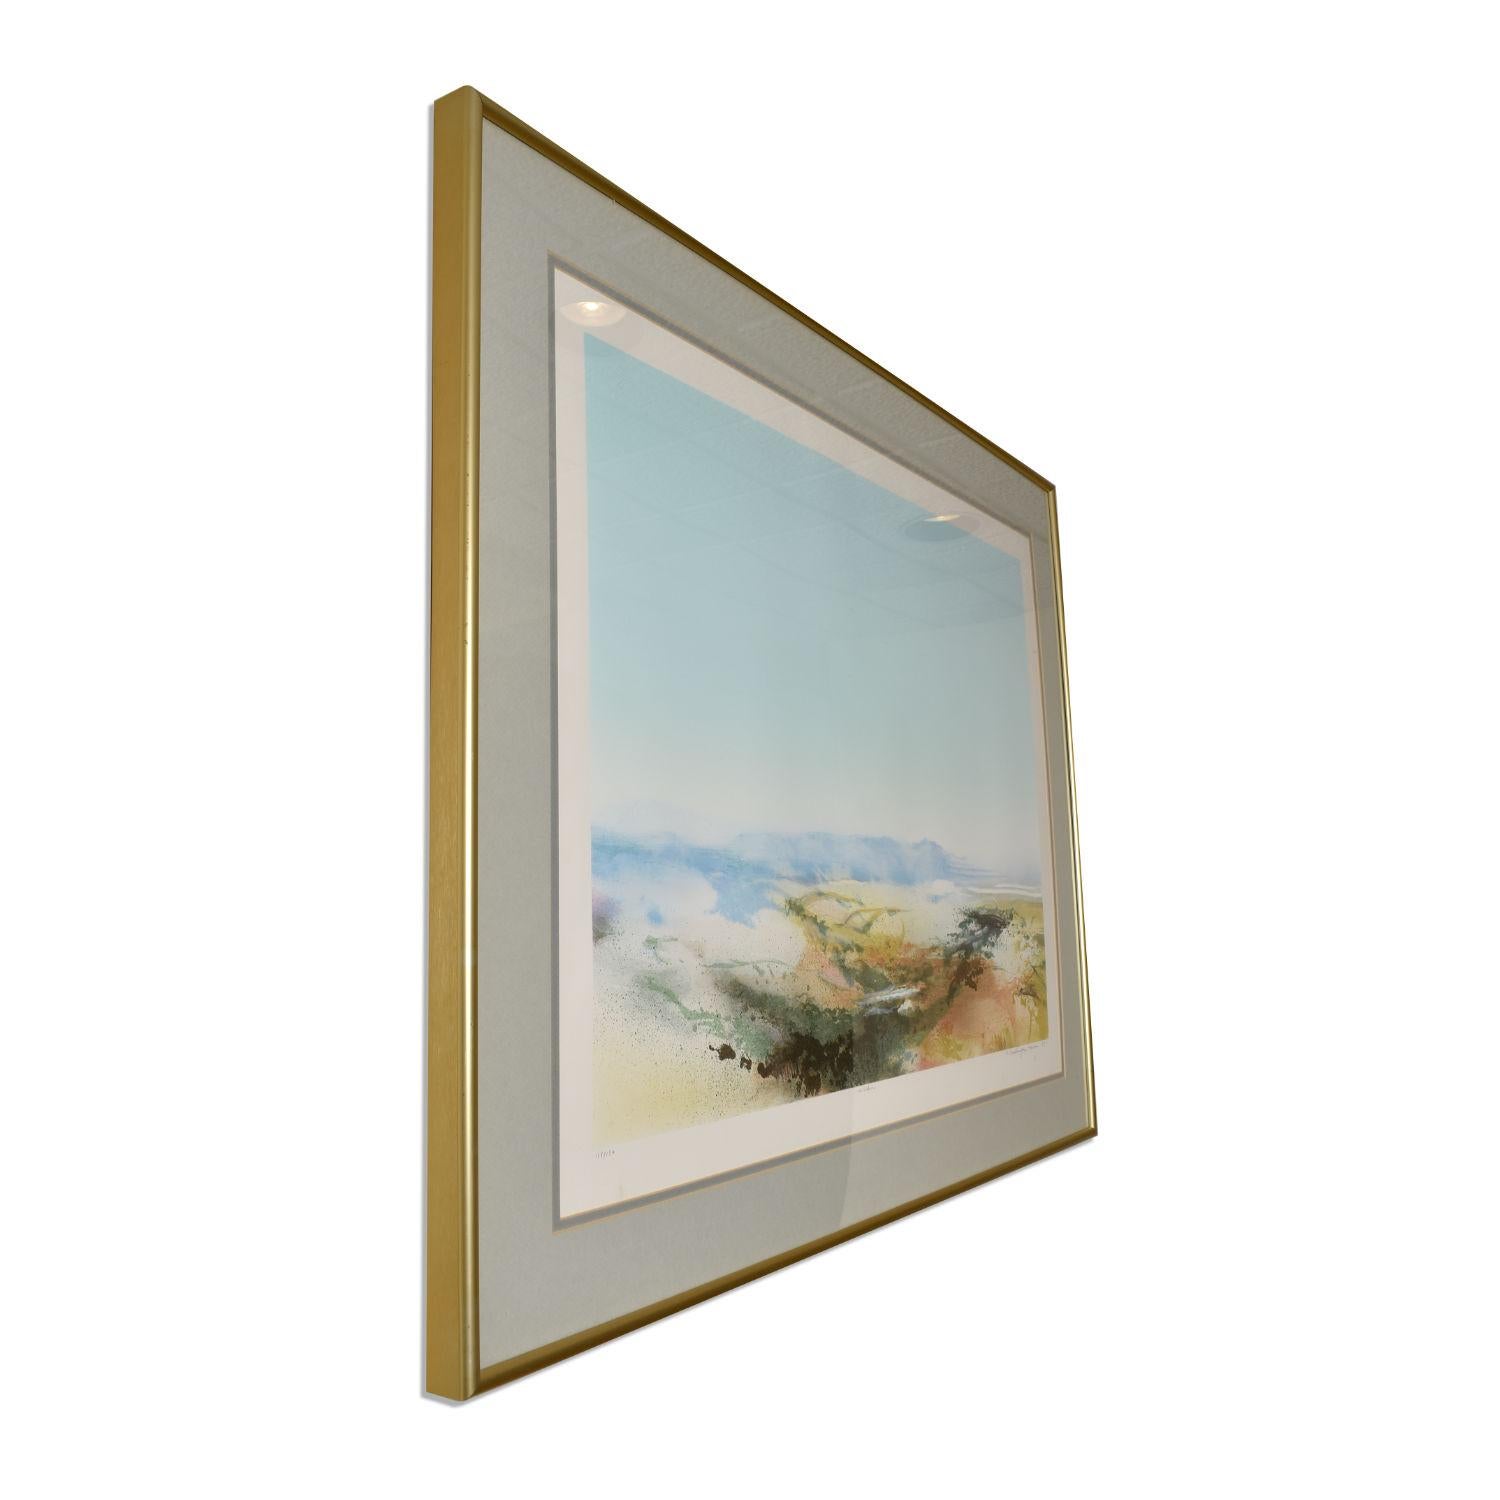 Fabulous aquatint etching by celebrated artist, contemporary painter John Maxon. The nearly four foot wide image is a broad field of sky blue with dynamic earthy strokes situated at the horizon. “Hi Rider” is abstract and open to interpretation,